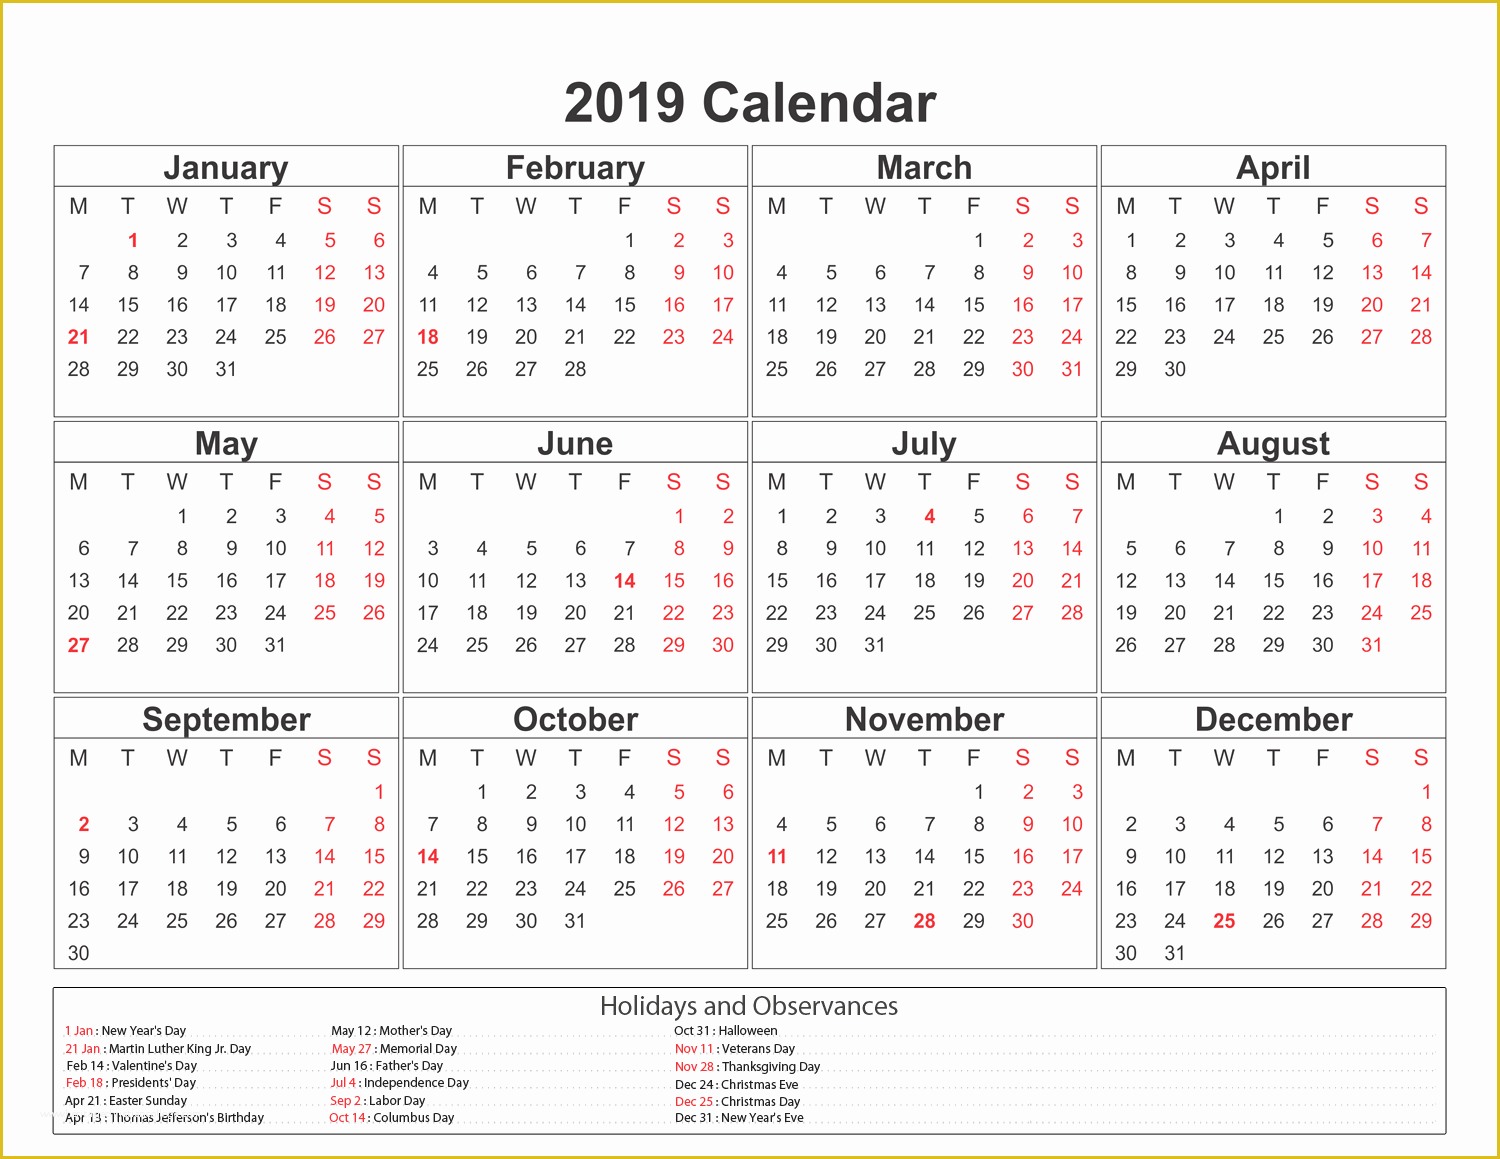 Holiday Schedule Template Free Of Blank Printable Calendar 2019 with Holidays